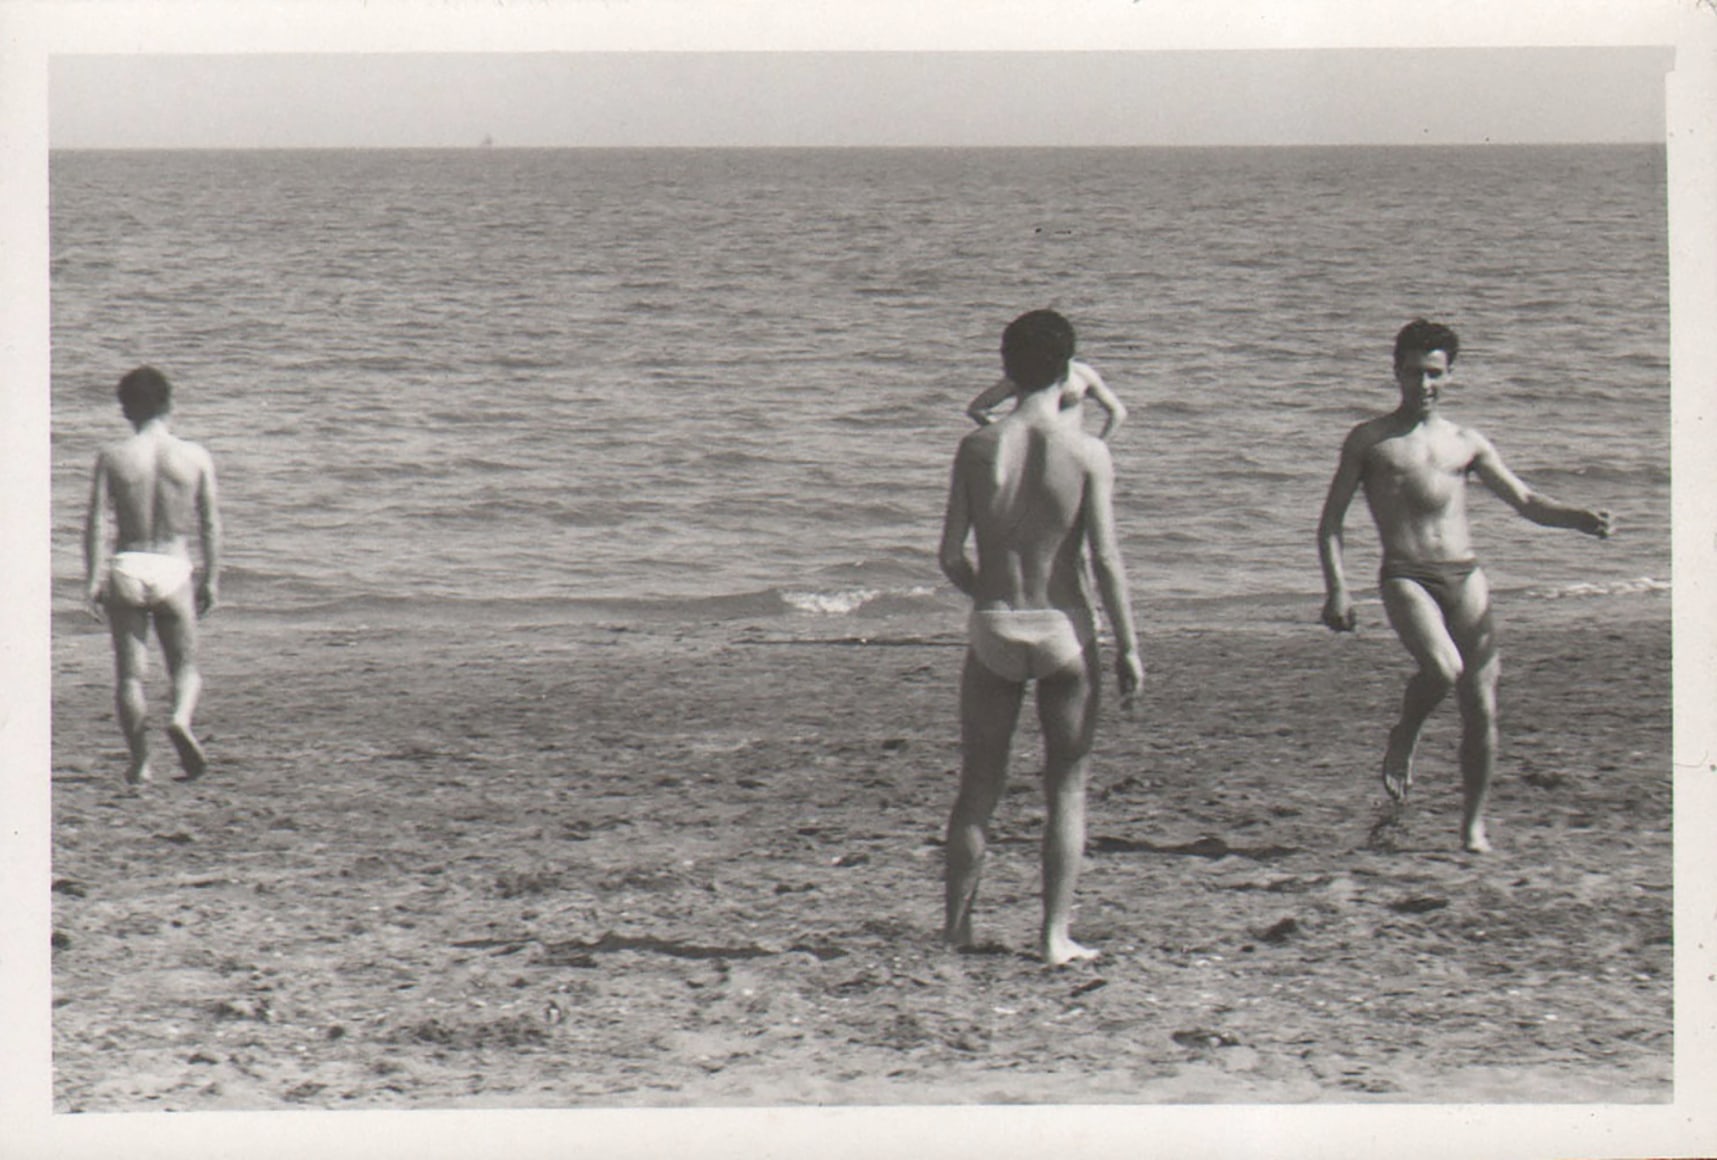 PaJaMa, Untitled, ​c. 1945. Four men in swimsuits stand on the beach. Two face the camera and two face away, towards the ocean.